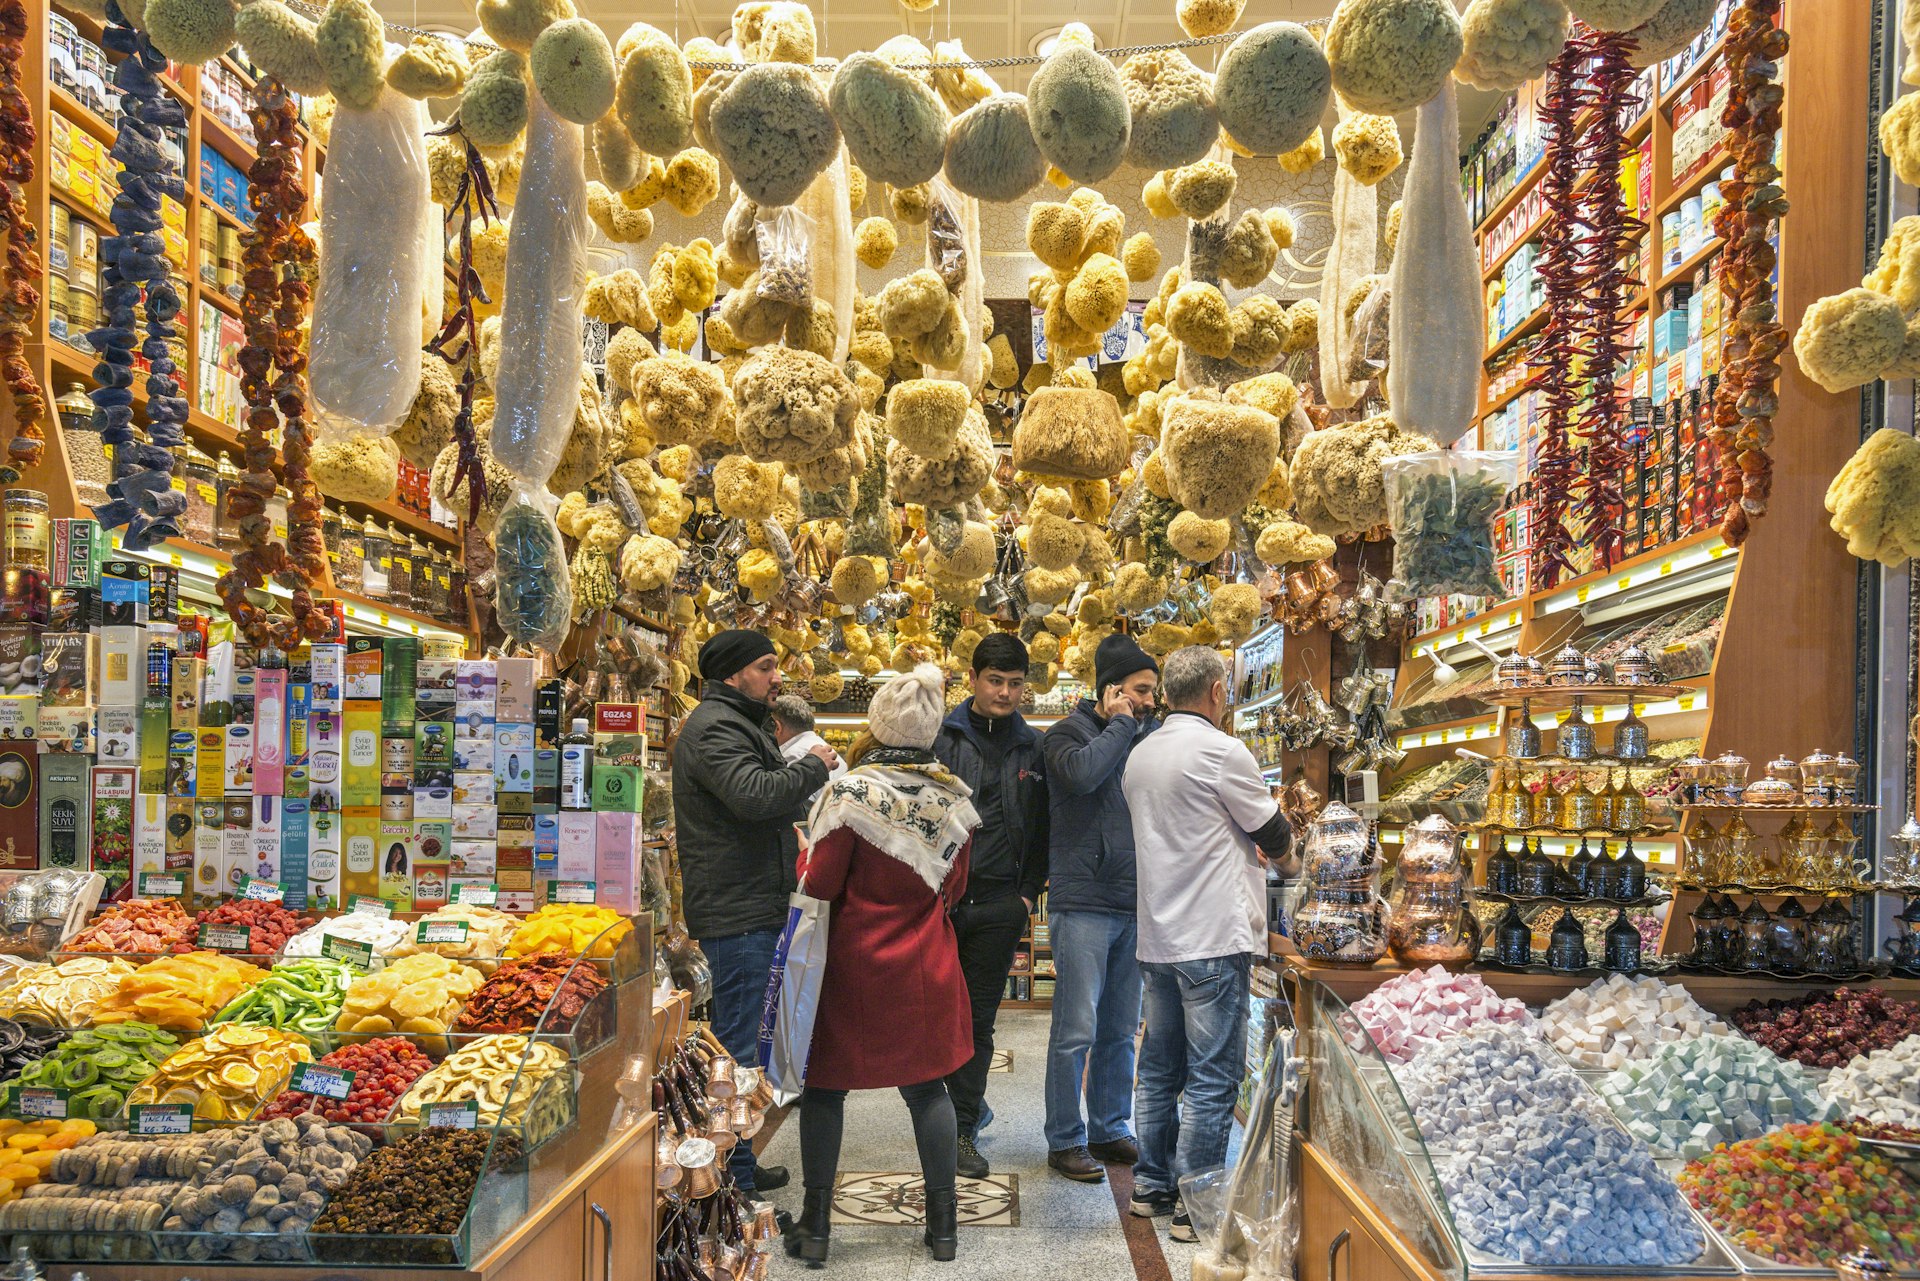 People shopping in the Spice Bazaar in the Eminonu quarter of the Fatih district in Istanbul. 